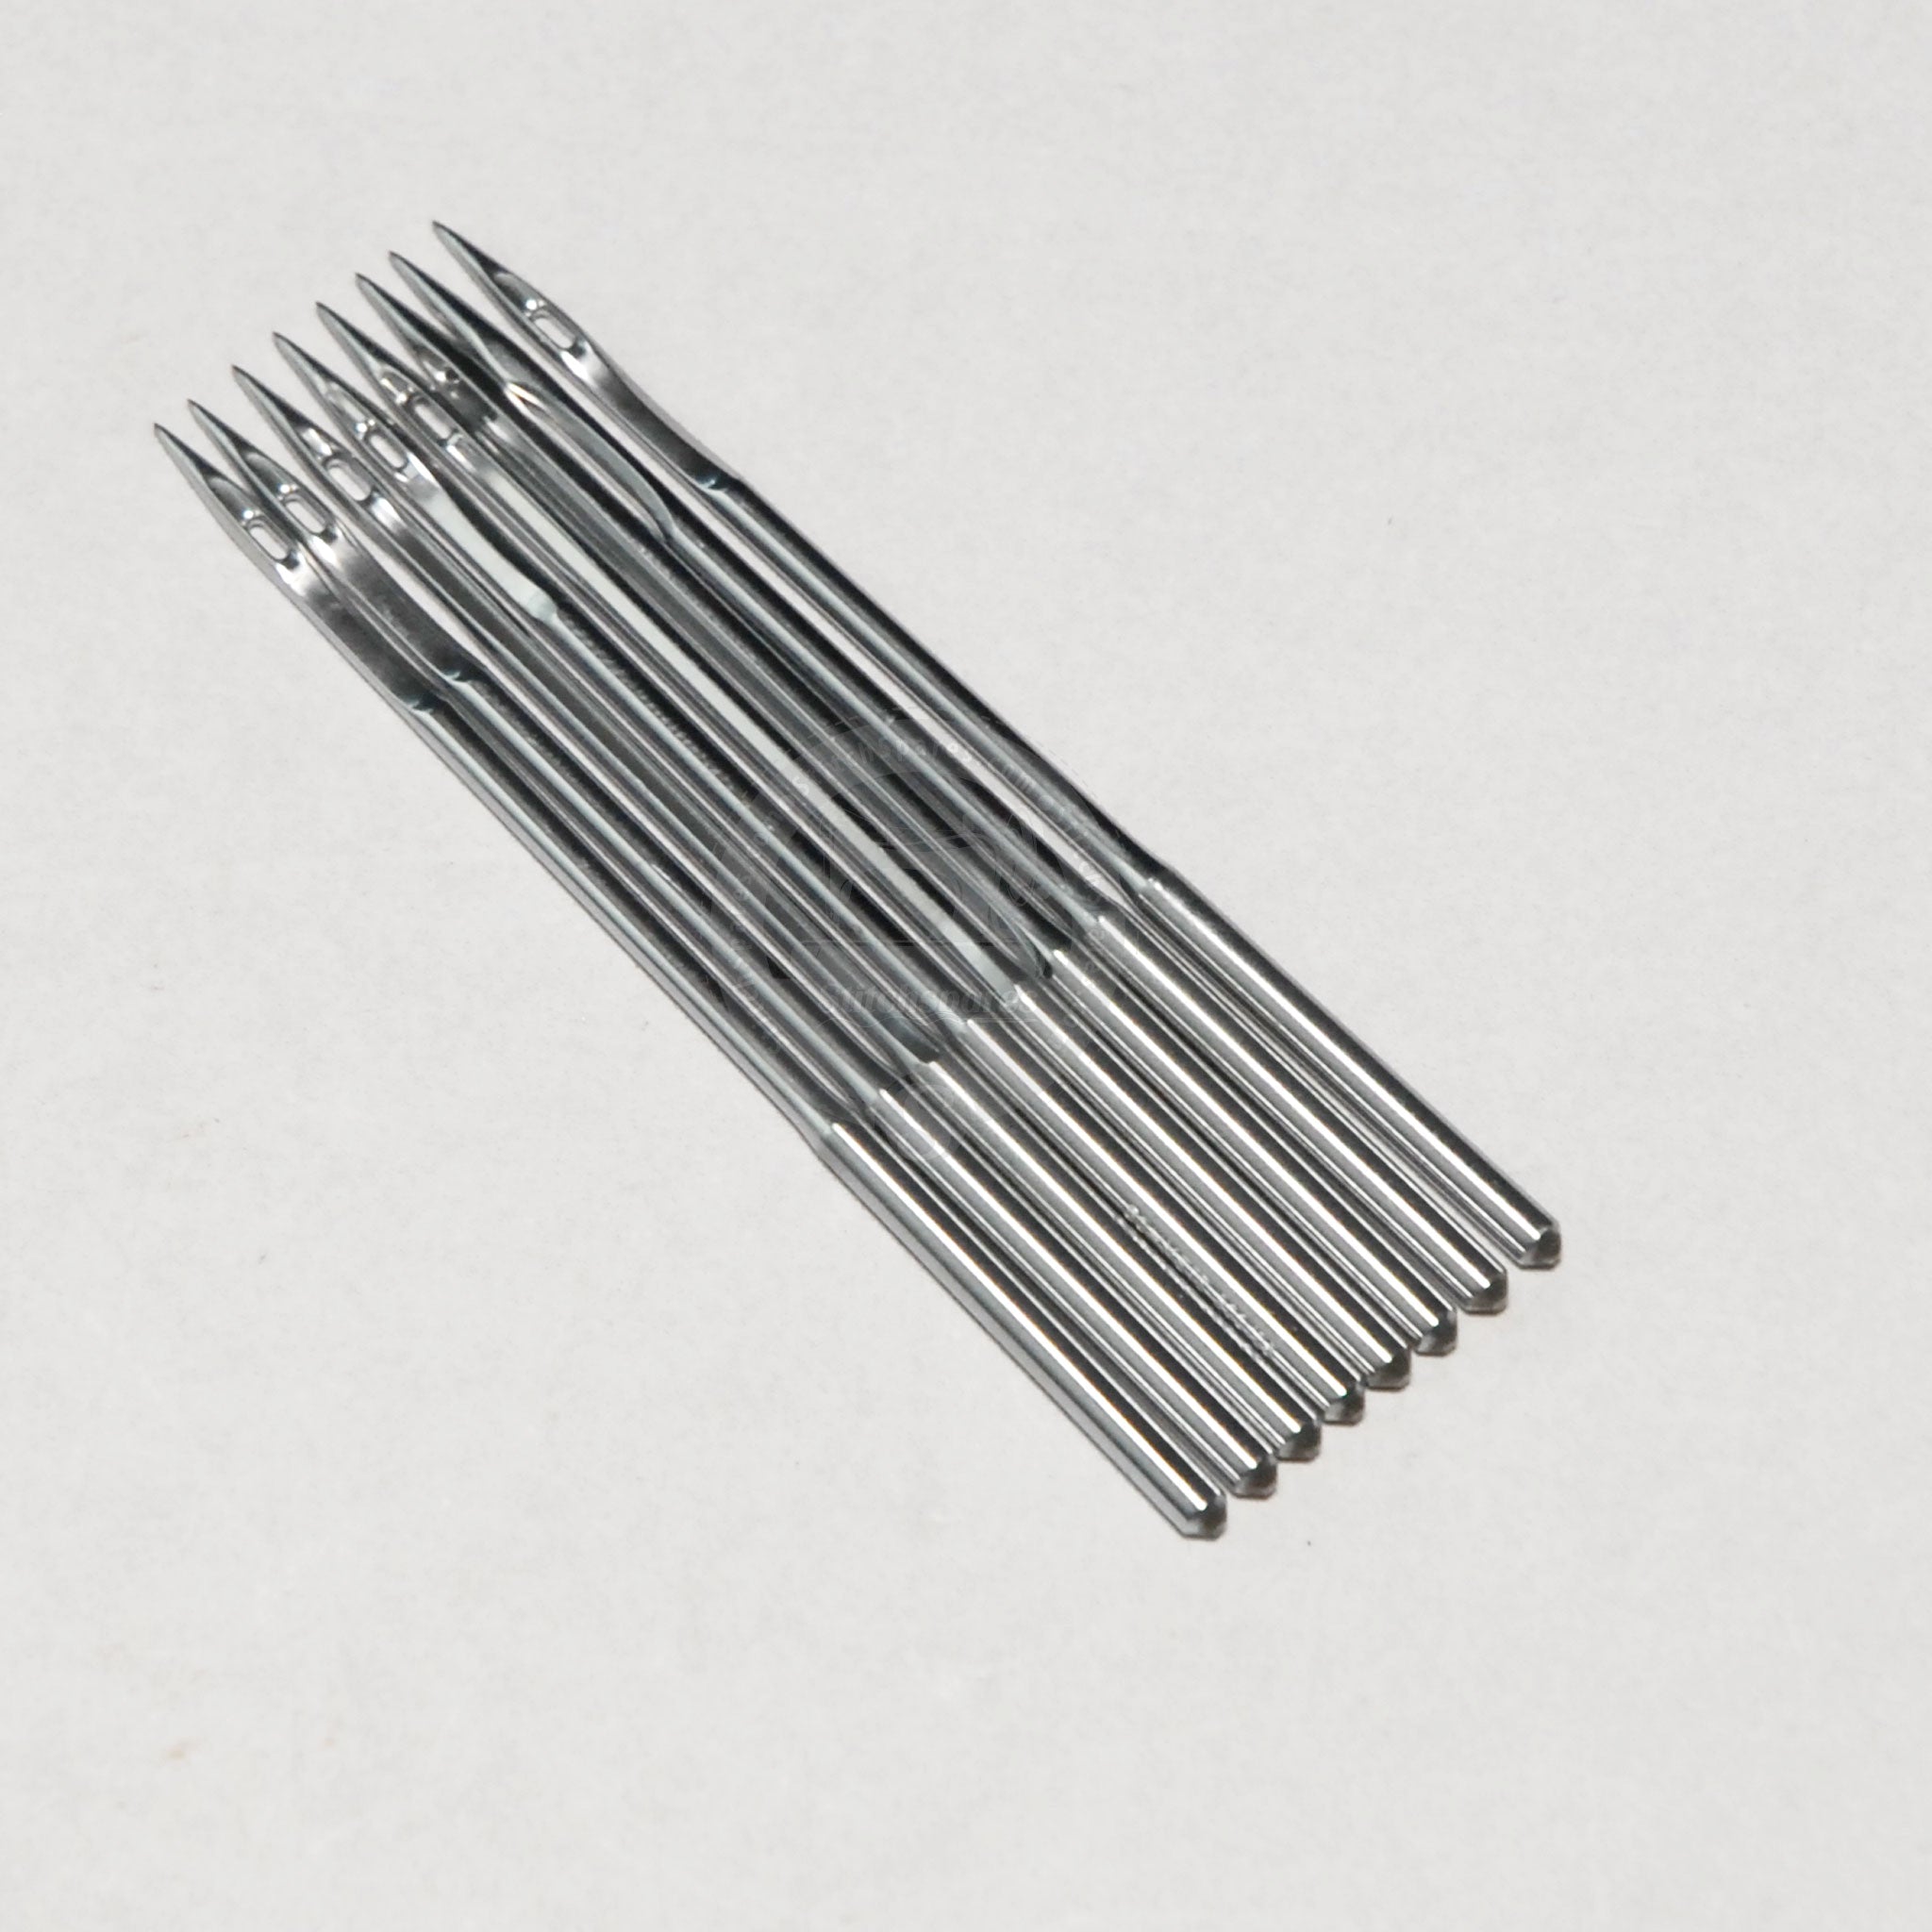 Curved Sewing Needles, DYX100 - Sewing Needles, Sewing Machine